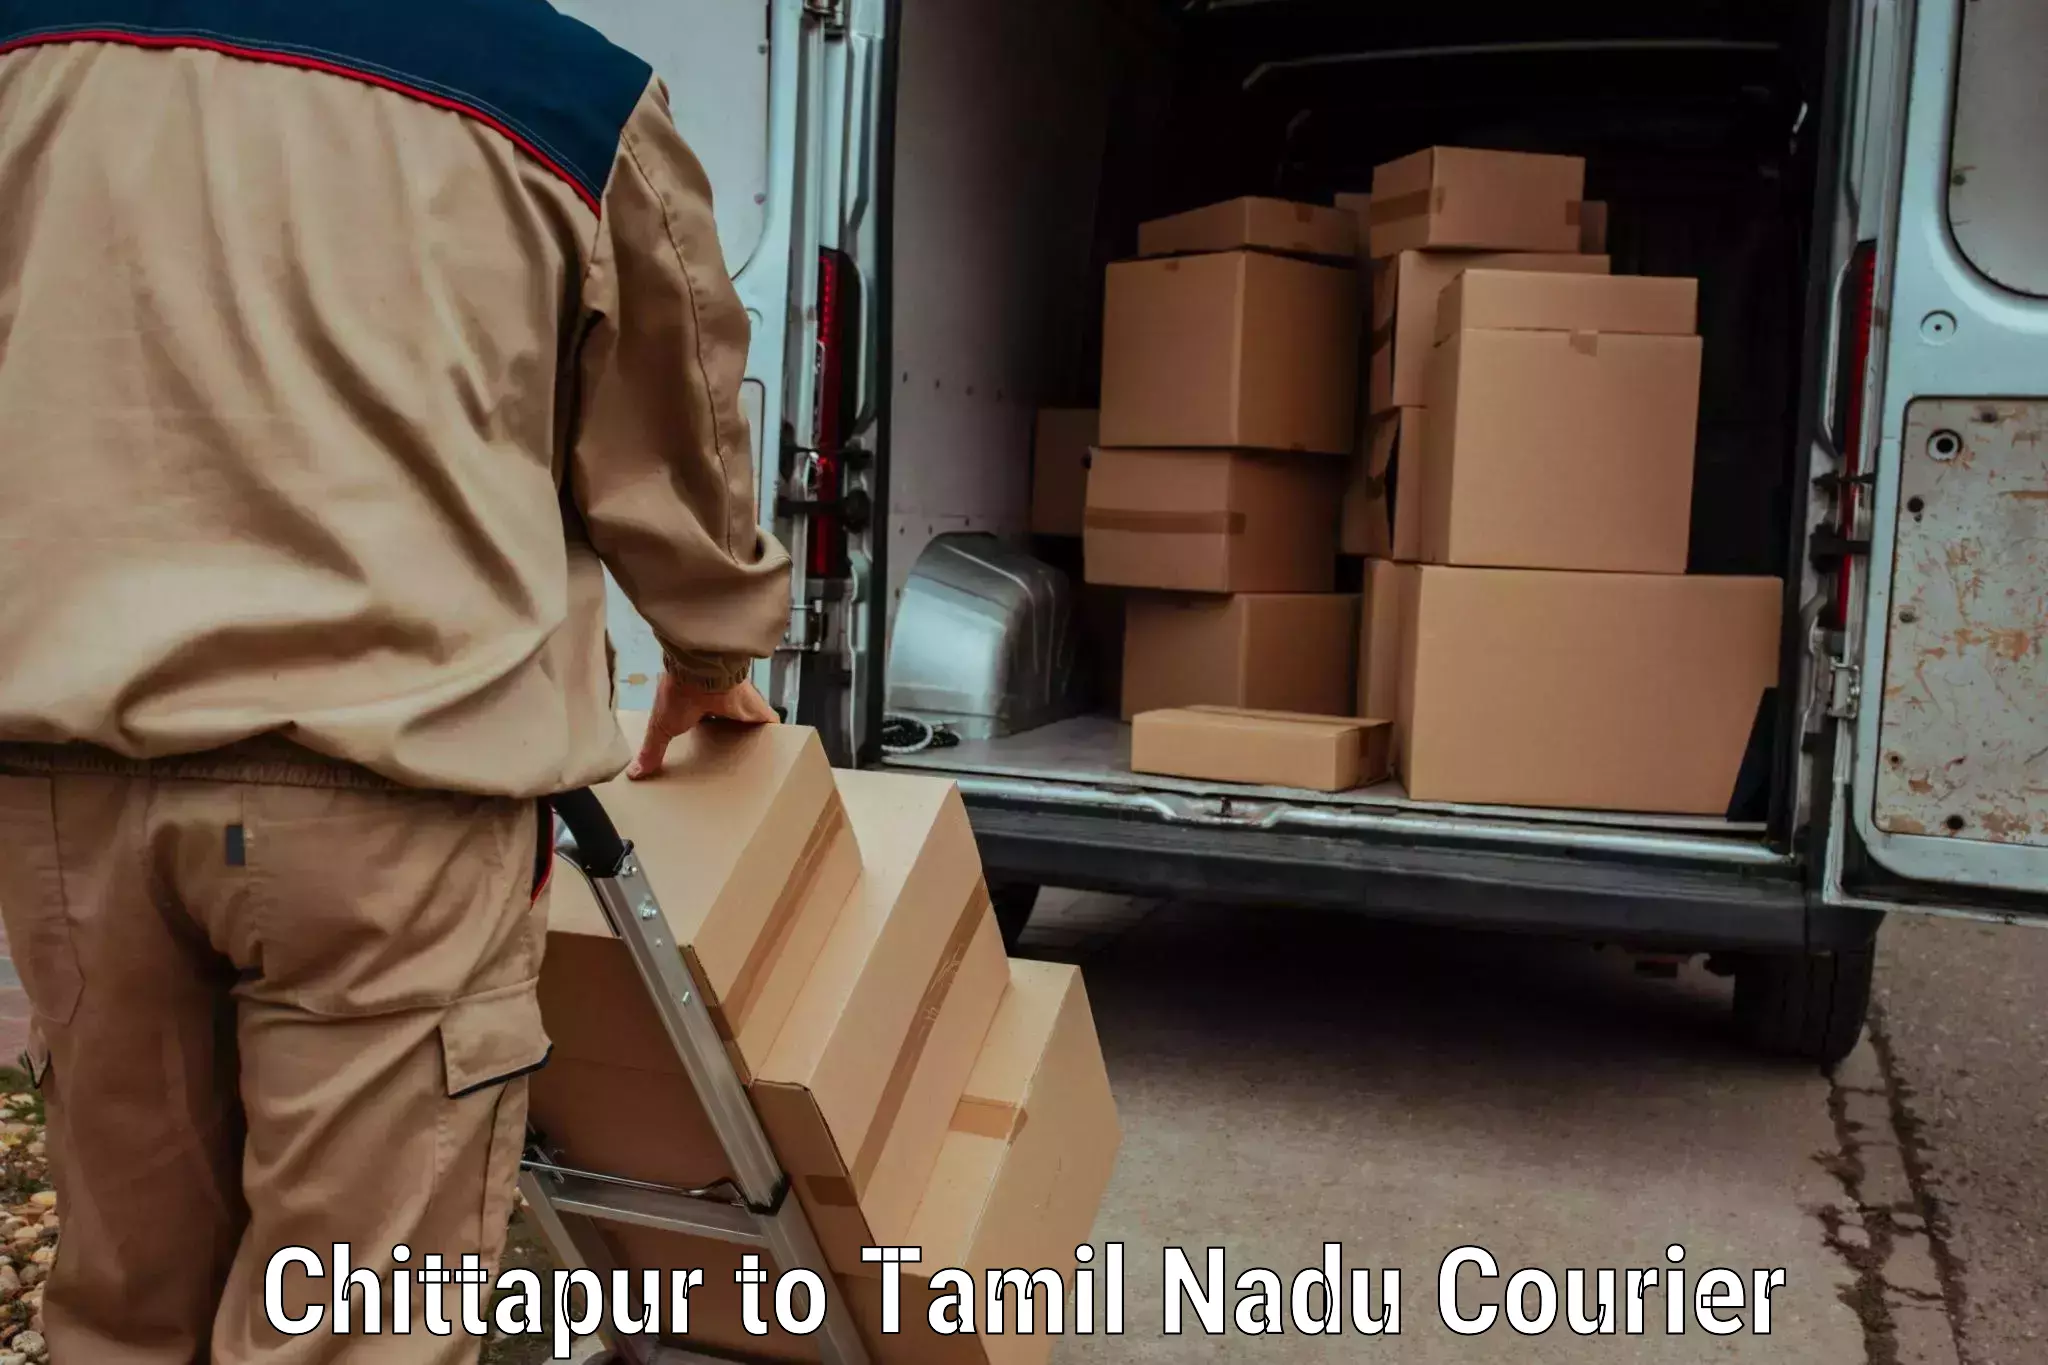 Multi-national courier services Chittapur to Tuticorin Port